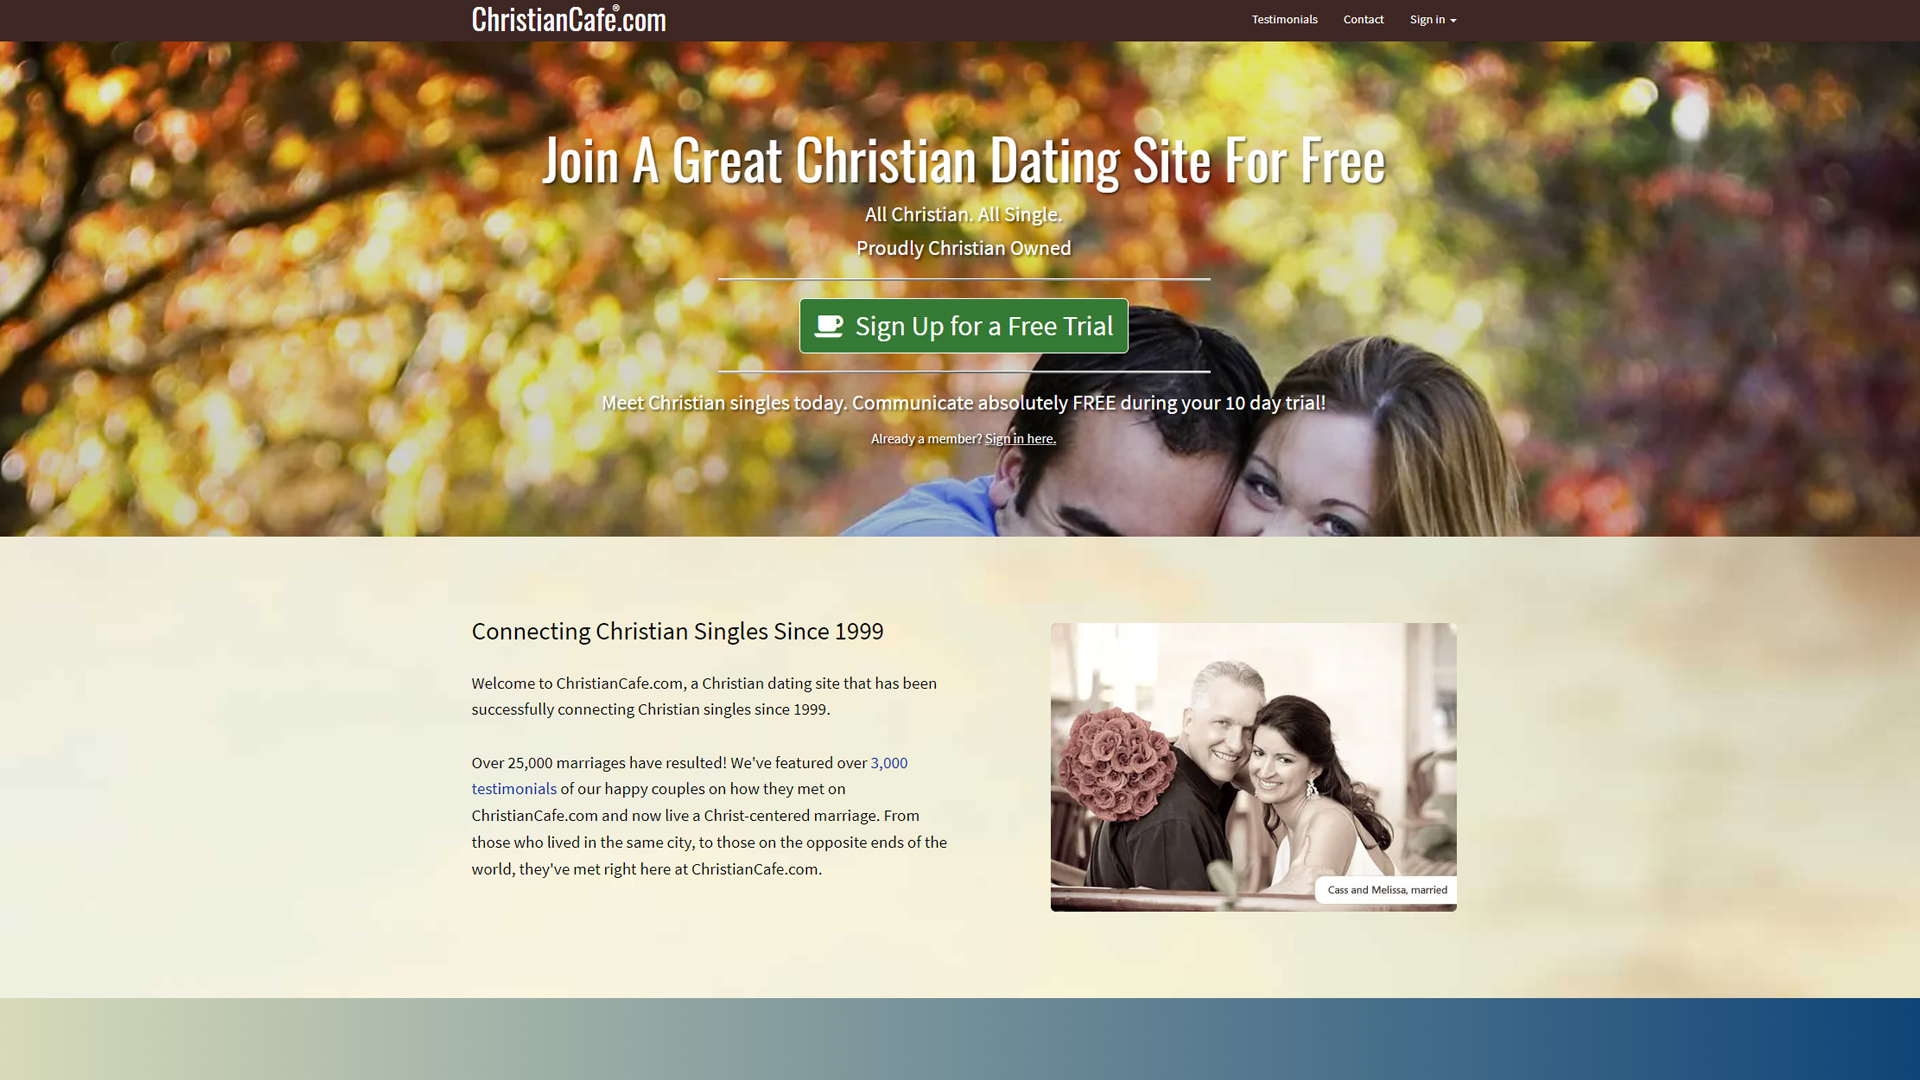 Christian Cafe dating site homepage.